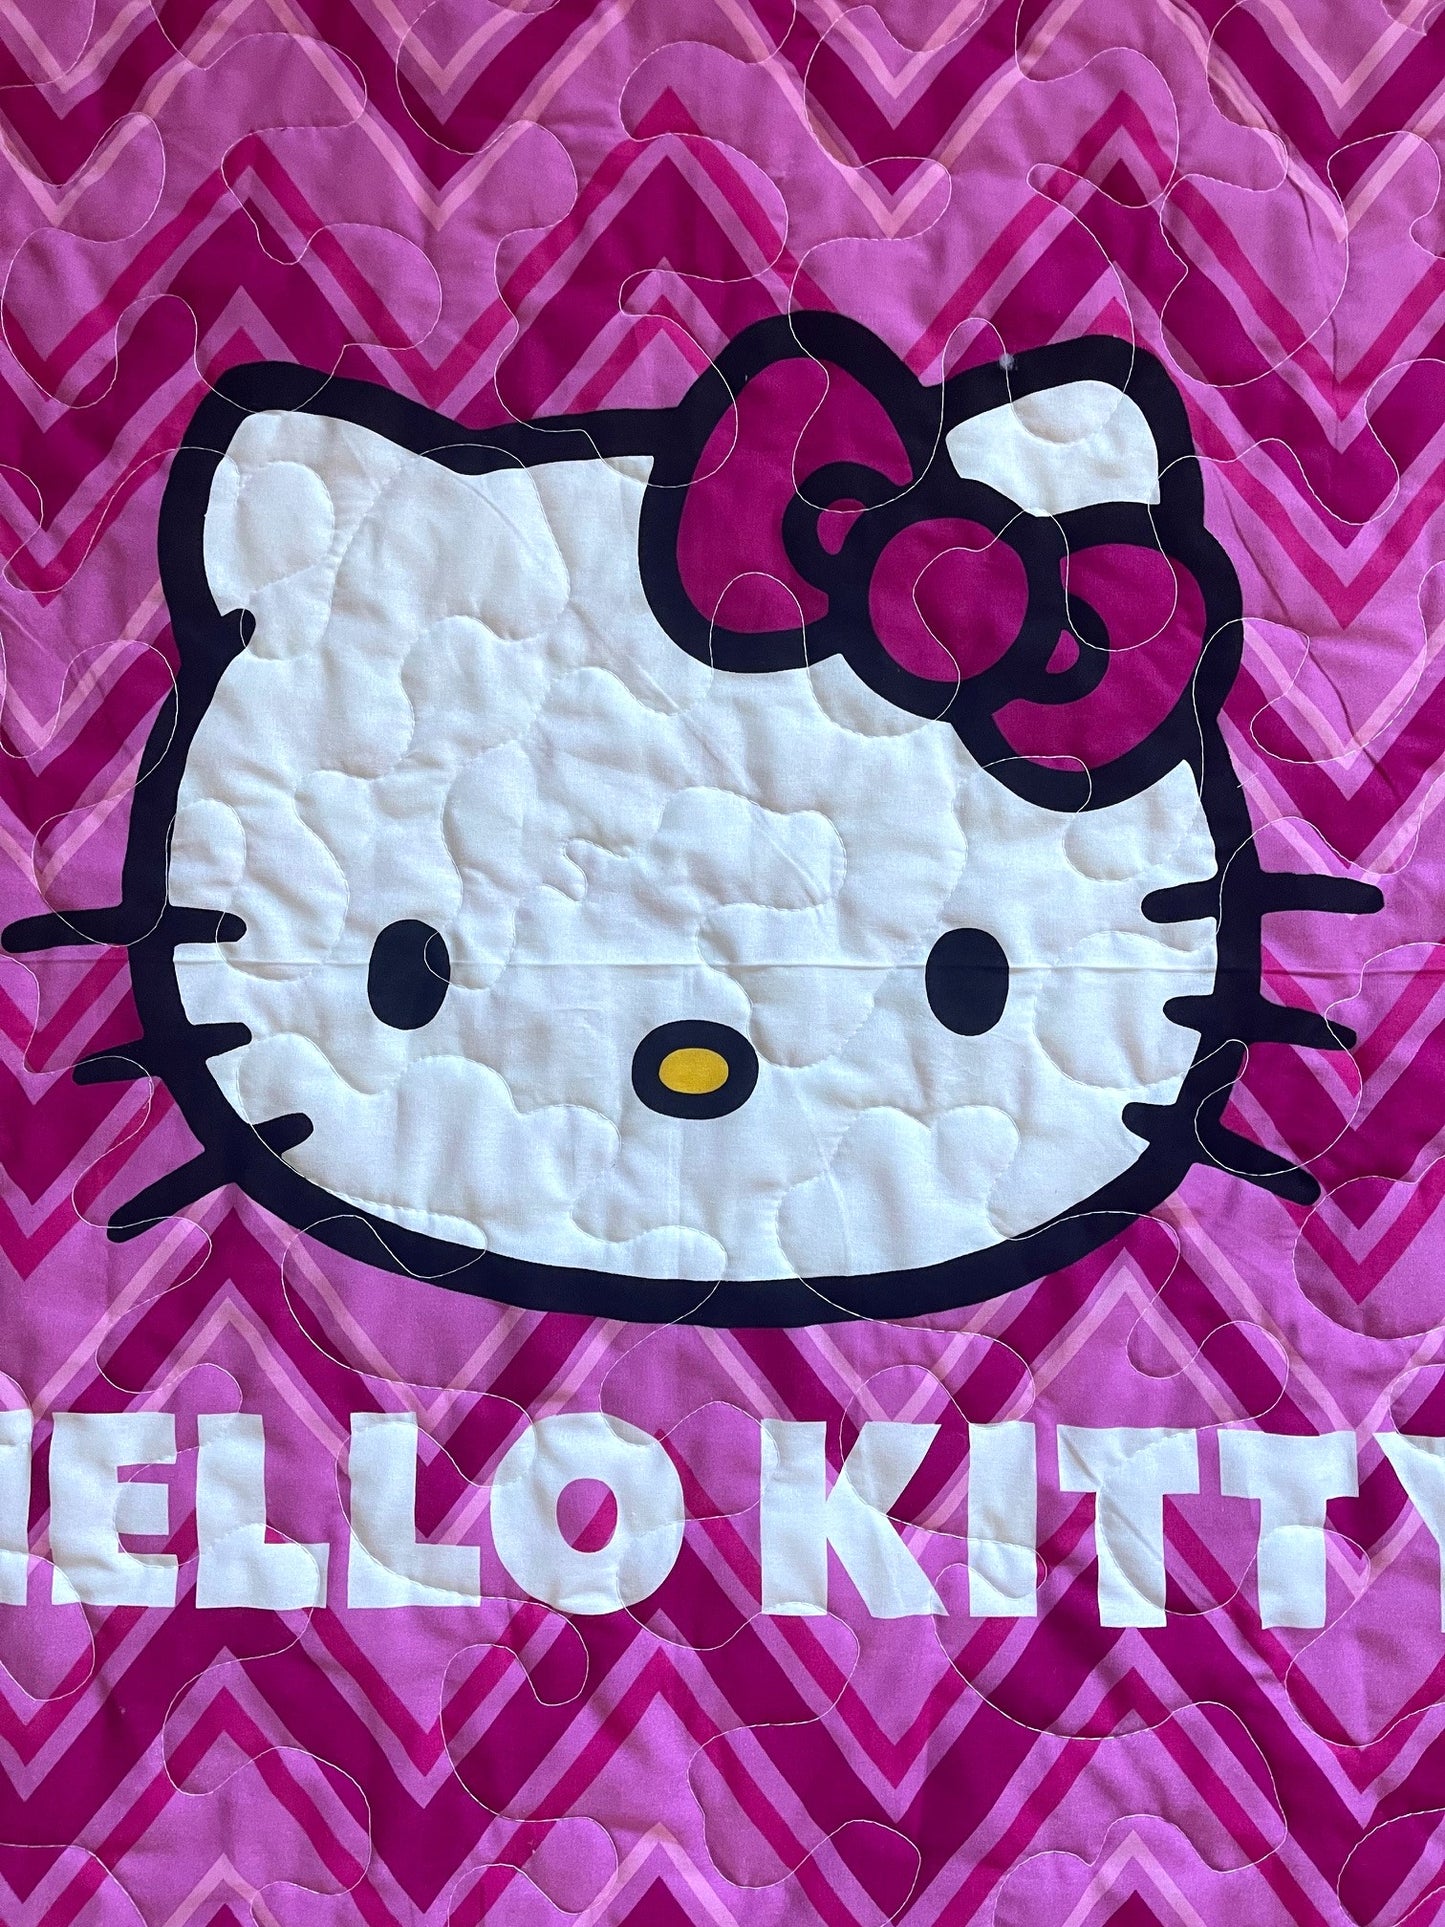 HELLO KITTY PINK CHEVRON INSPIRED QUILTED BLANKET